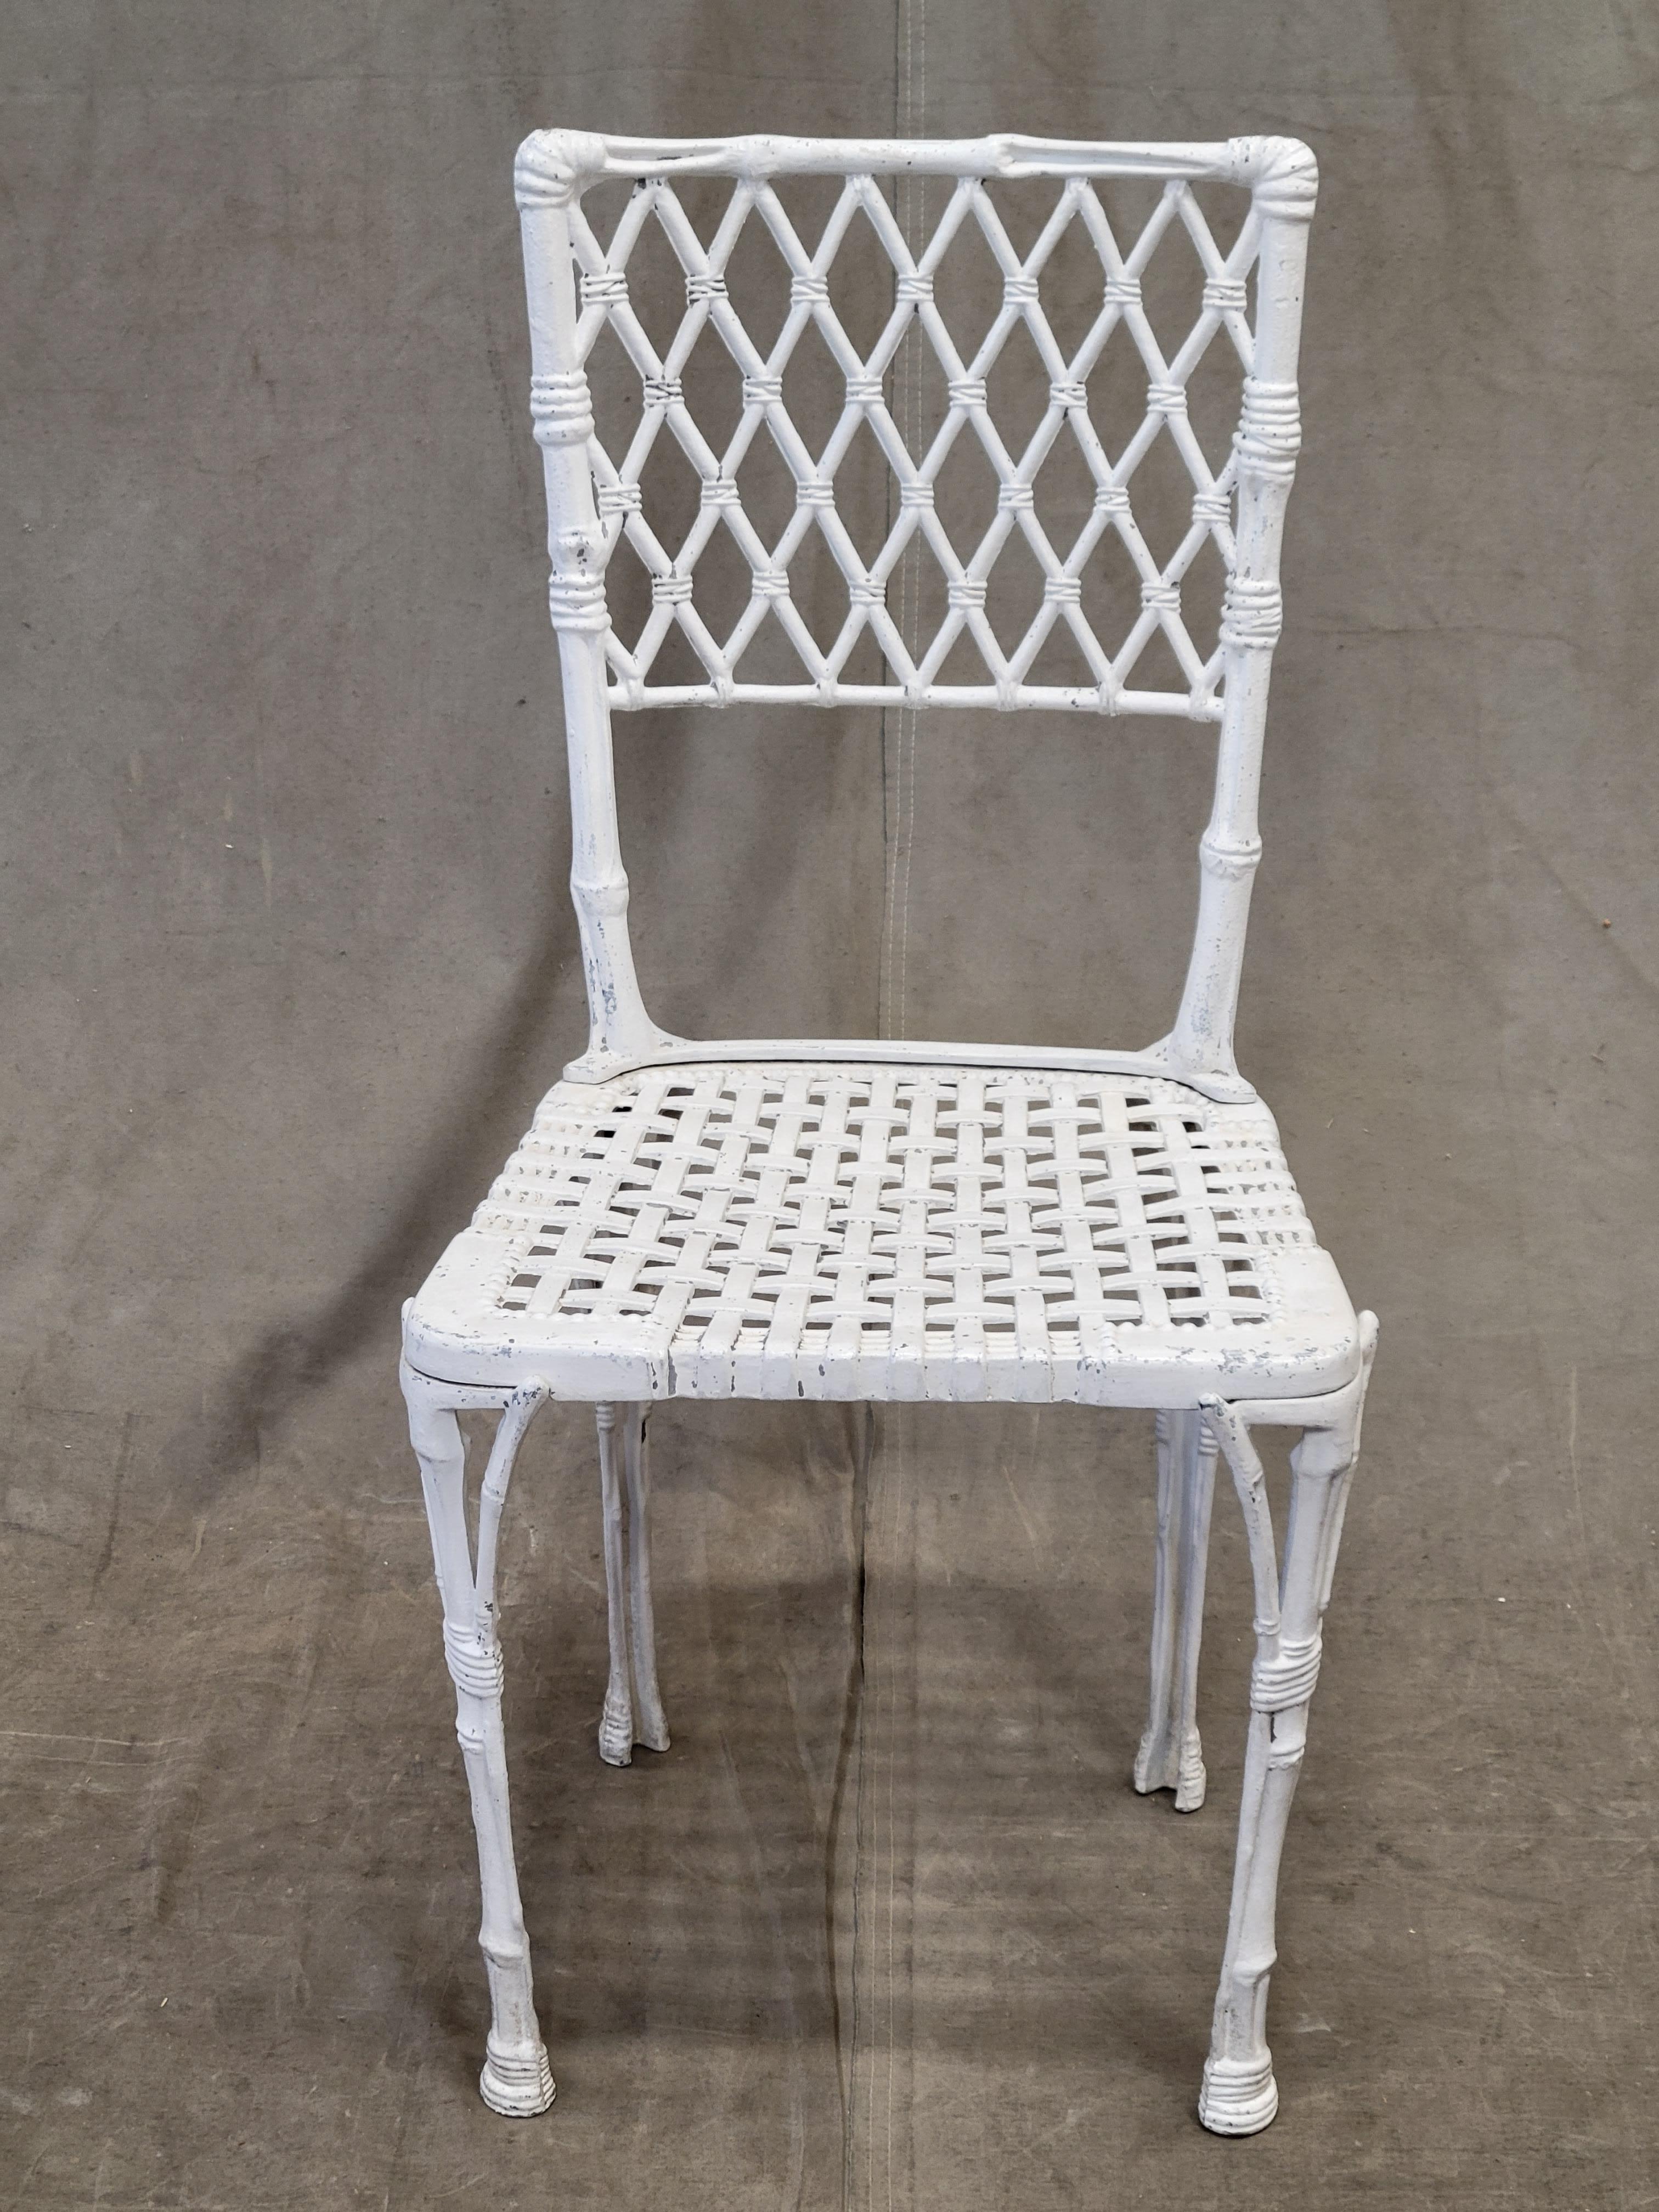 20th Century Vintage French Cast Aluminum Chinoiserie Faux Bamboo Garden Chairs - Set of 6